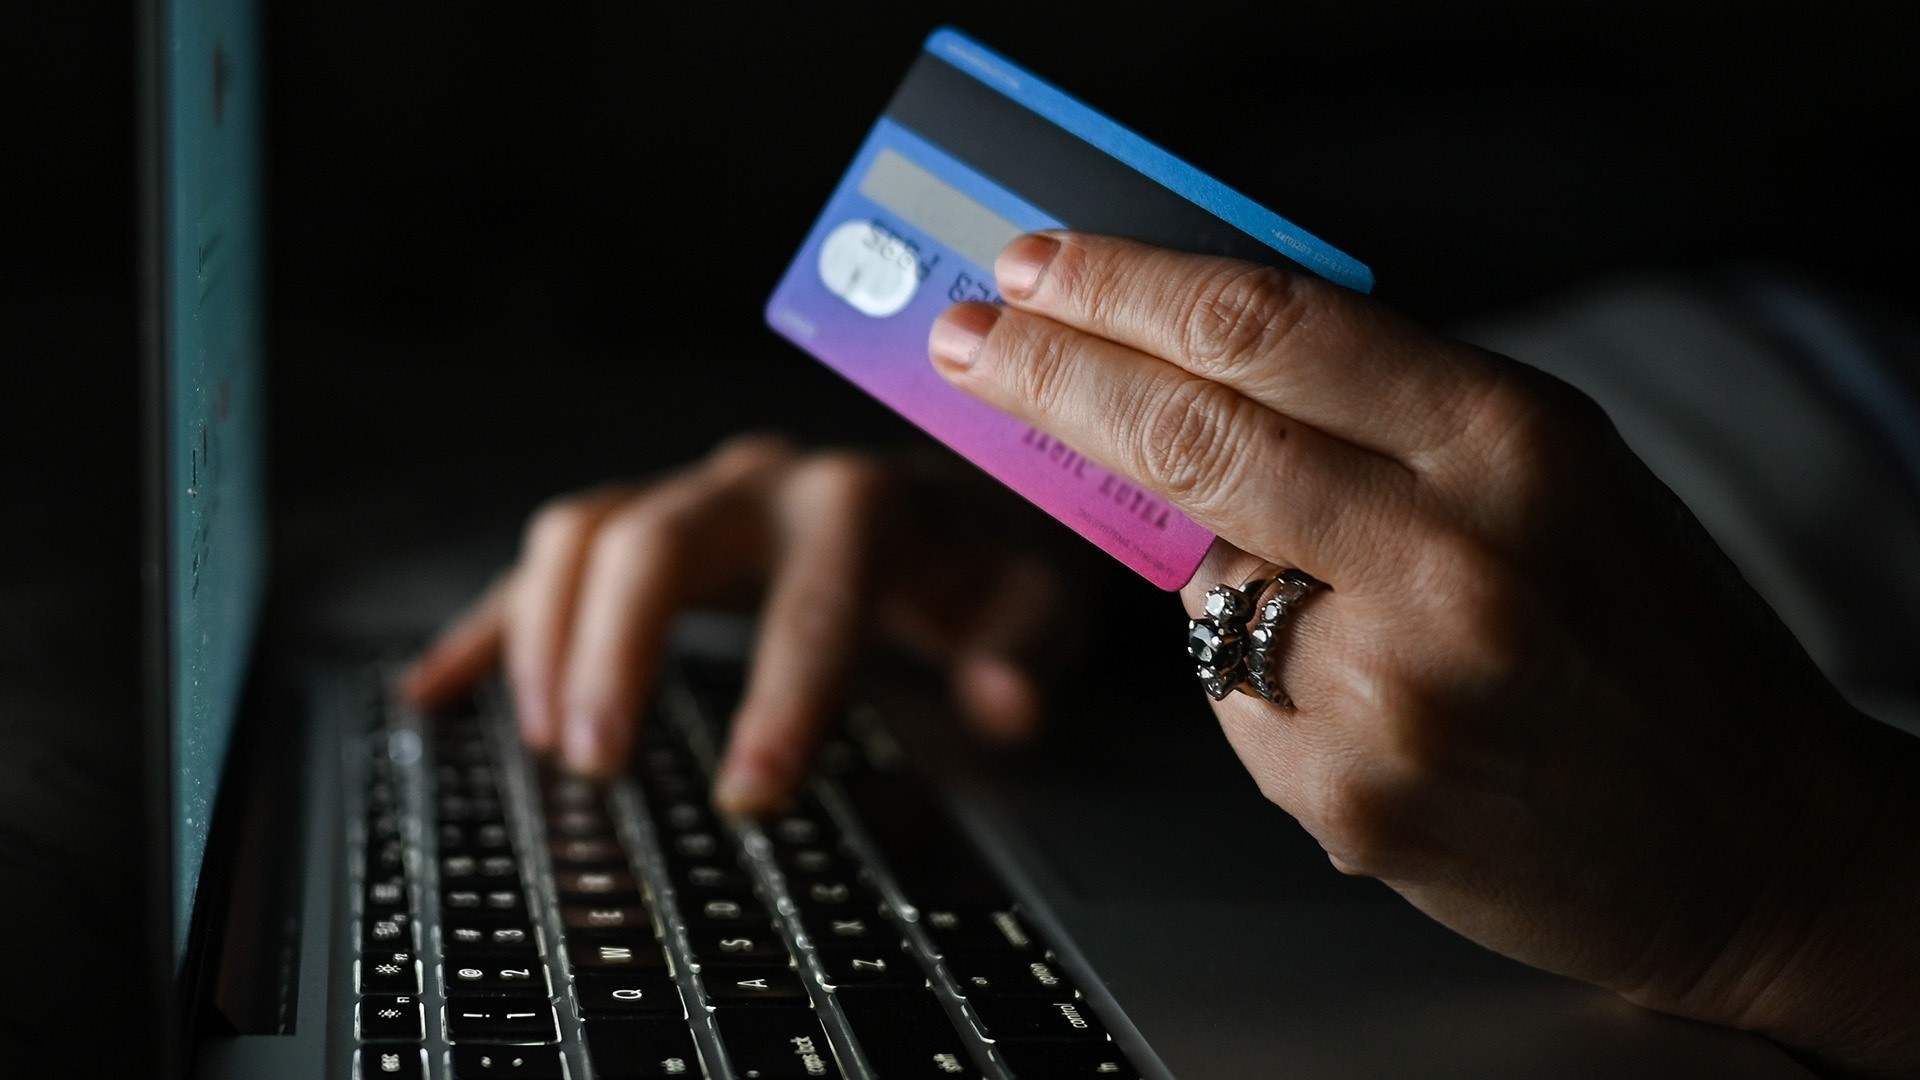 How to avoid scams and credit card fraud this holiday season